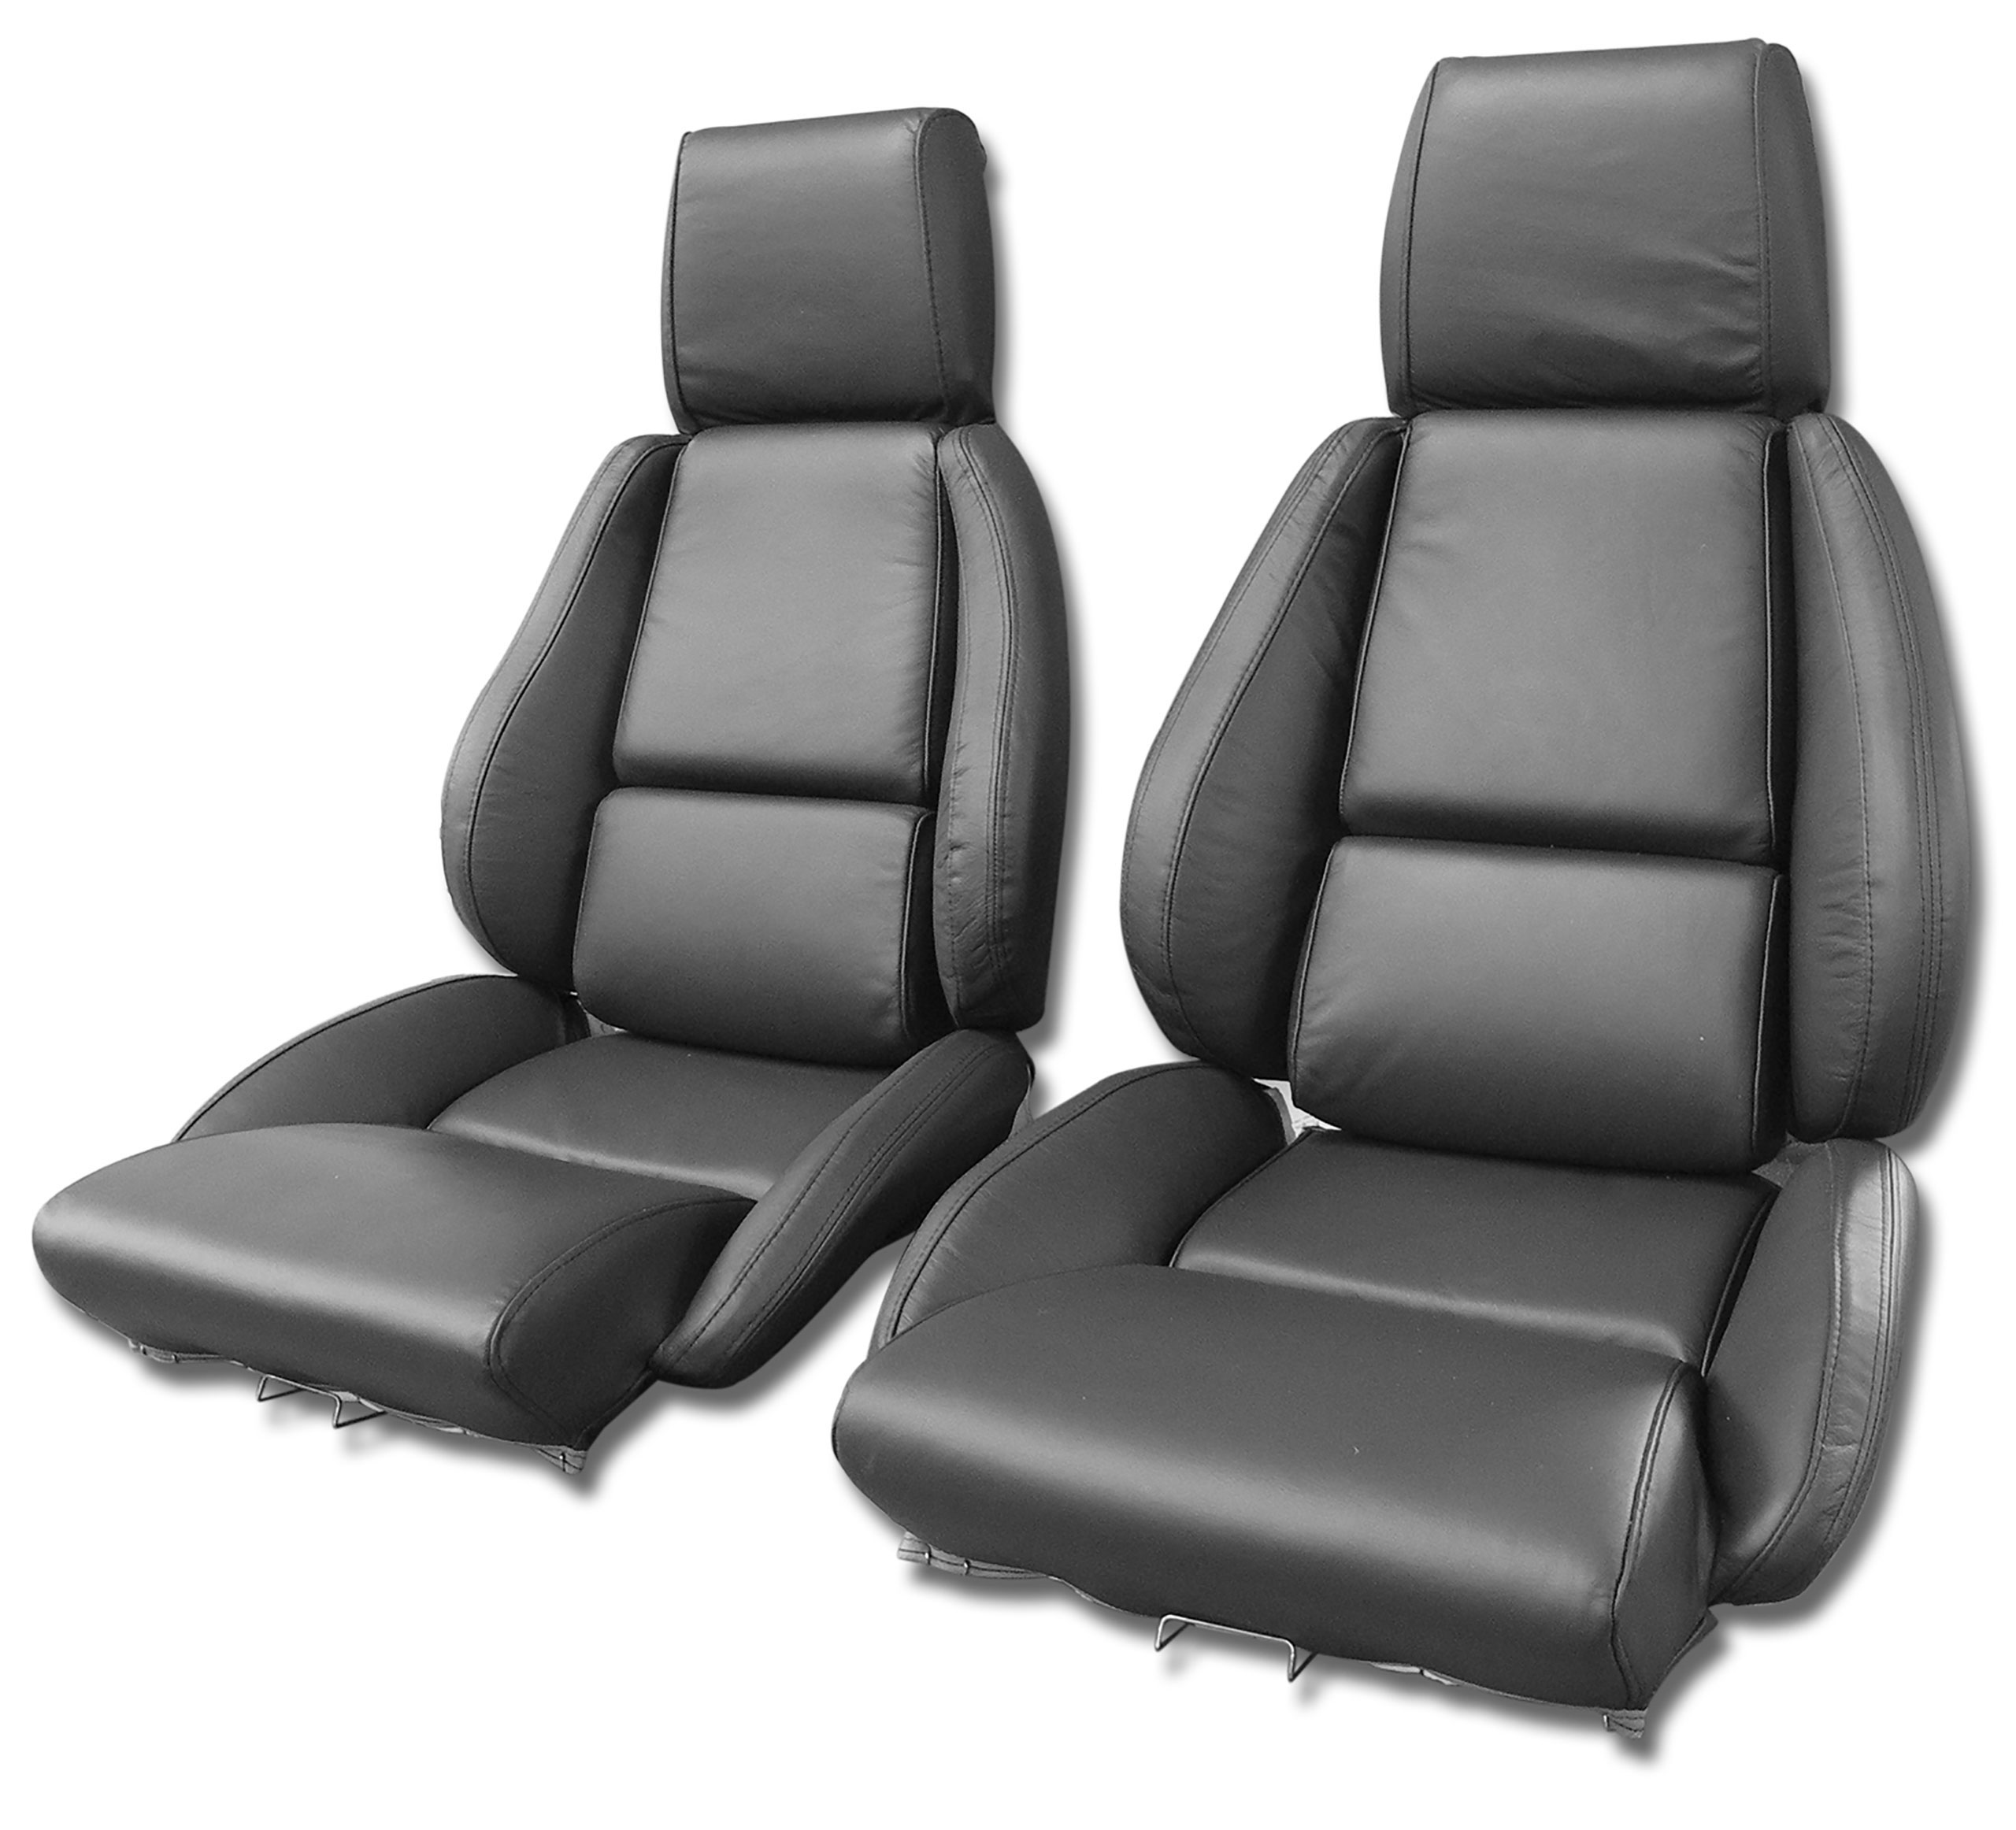 84-87 Corvette C4 420369E OE Style Embroidered Standard Leather Seat Covers W/OE Perf Inserts Gray CA-468422 